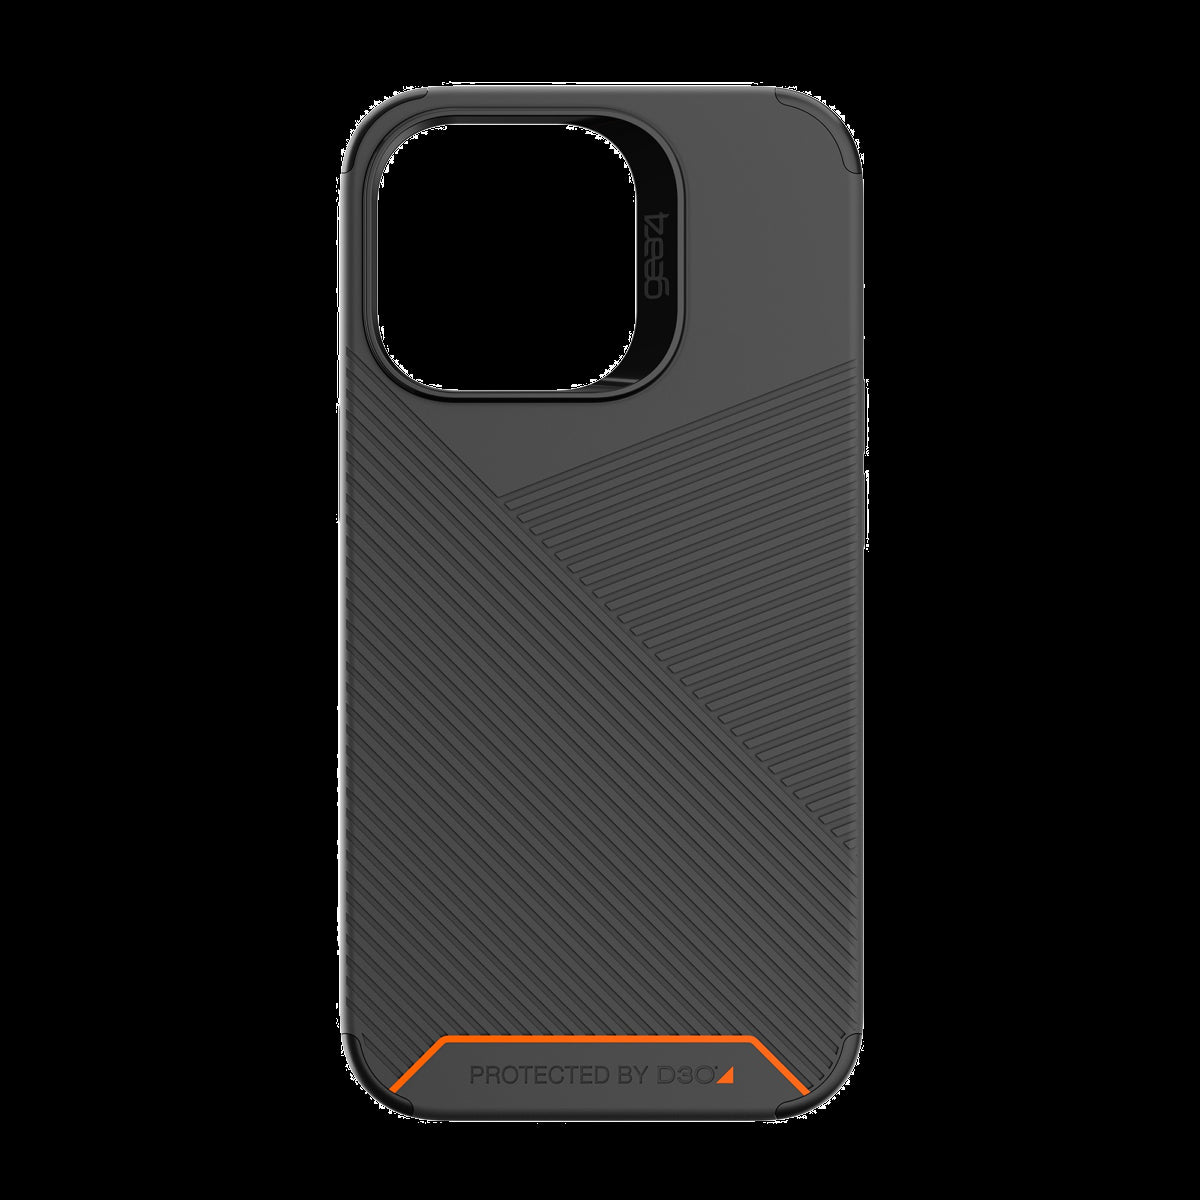 Previously known as Battersea, the Denali case from Gear4 offers ultimate protection thanks to its interior featuring an extra layer of D3O.